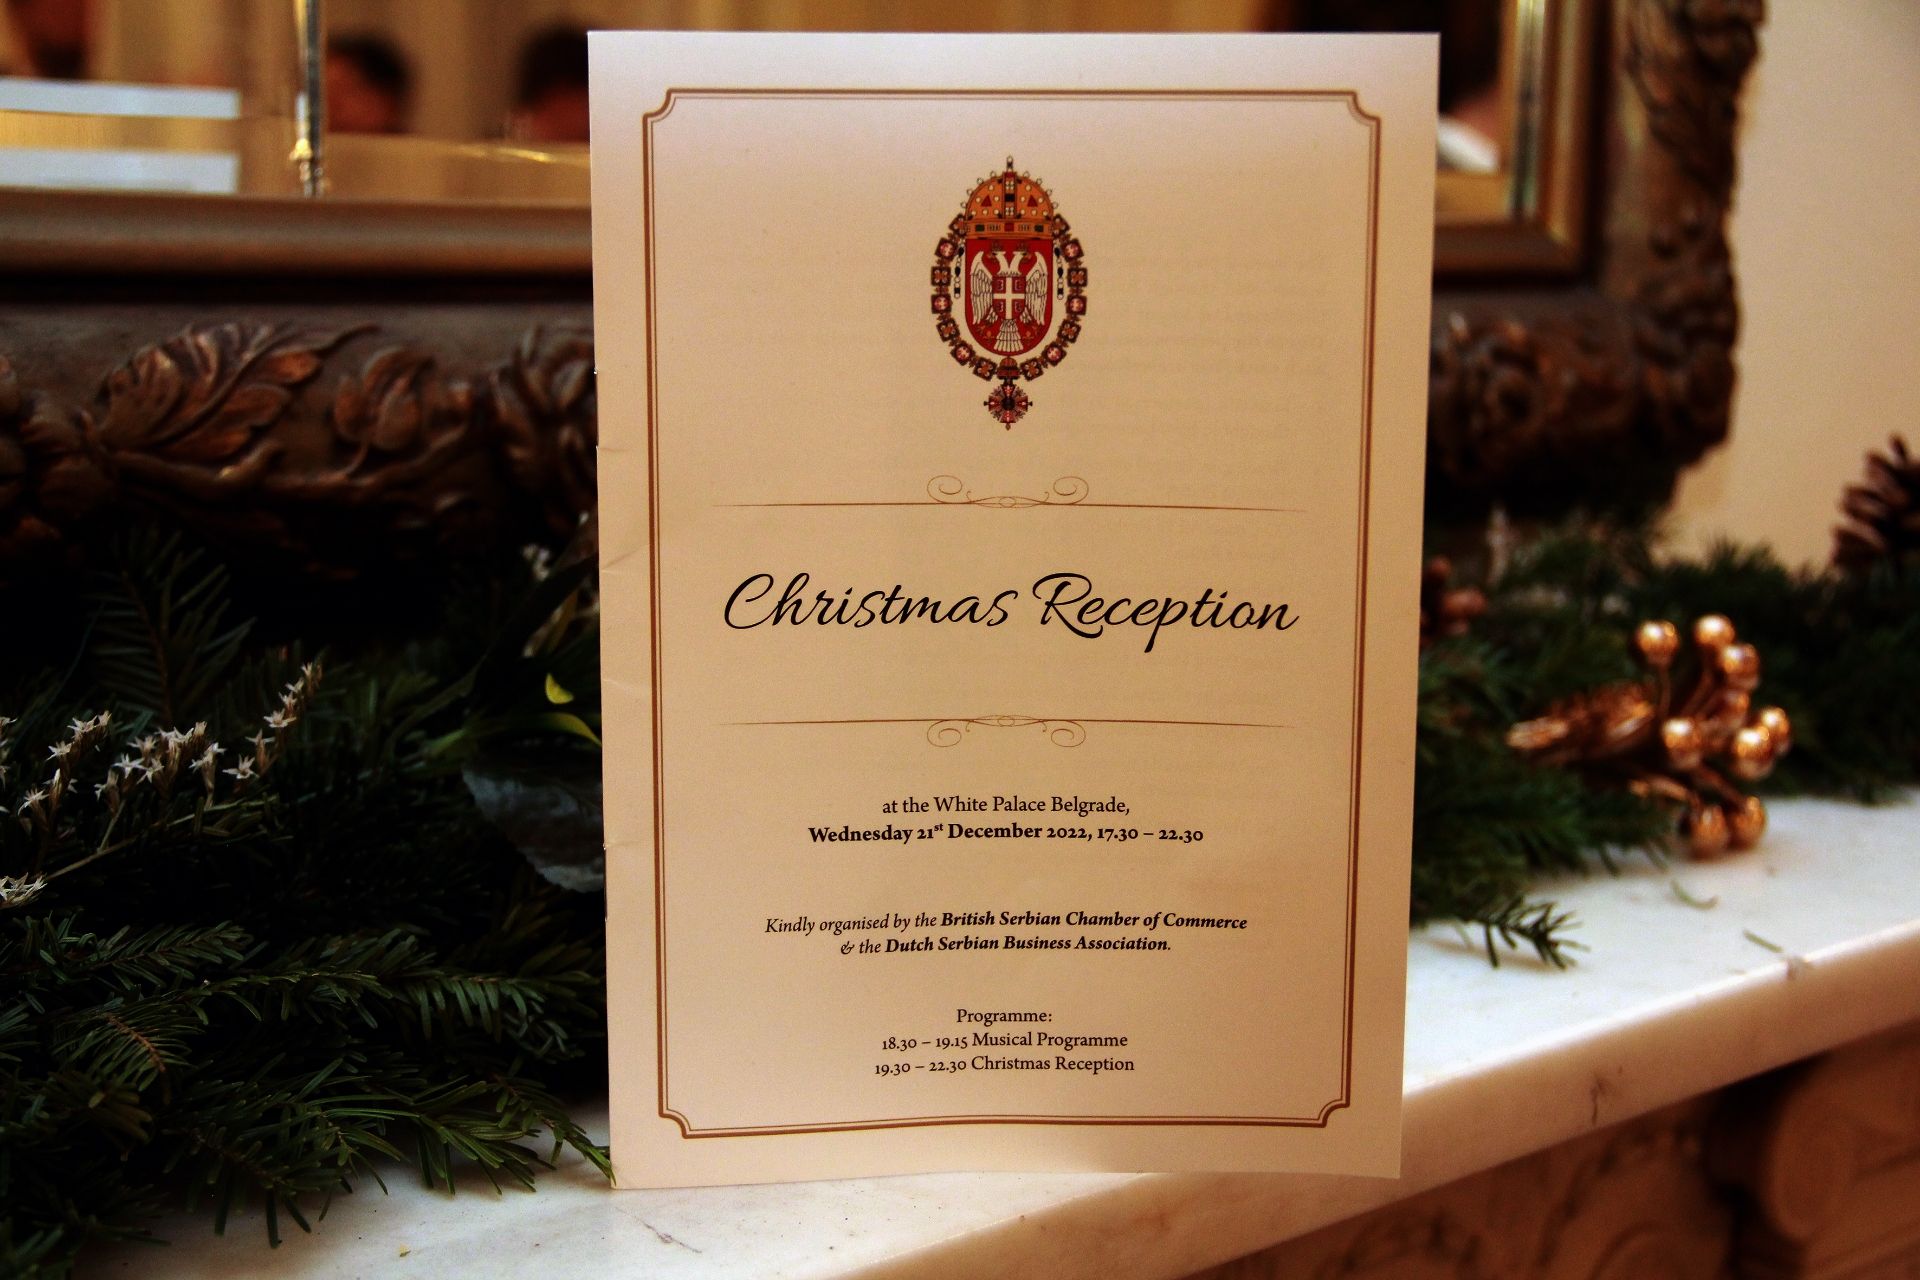 Christmas Reception and Carols from the White Palace